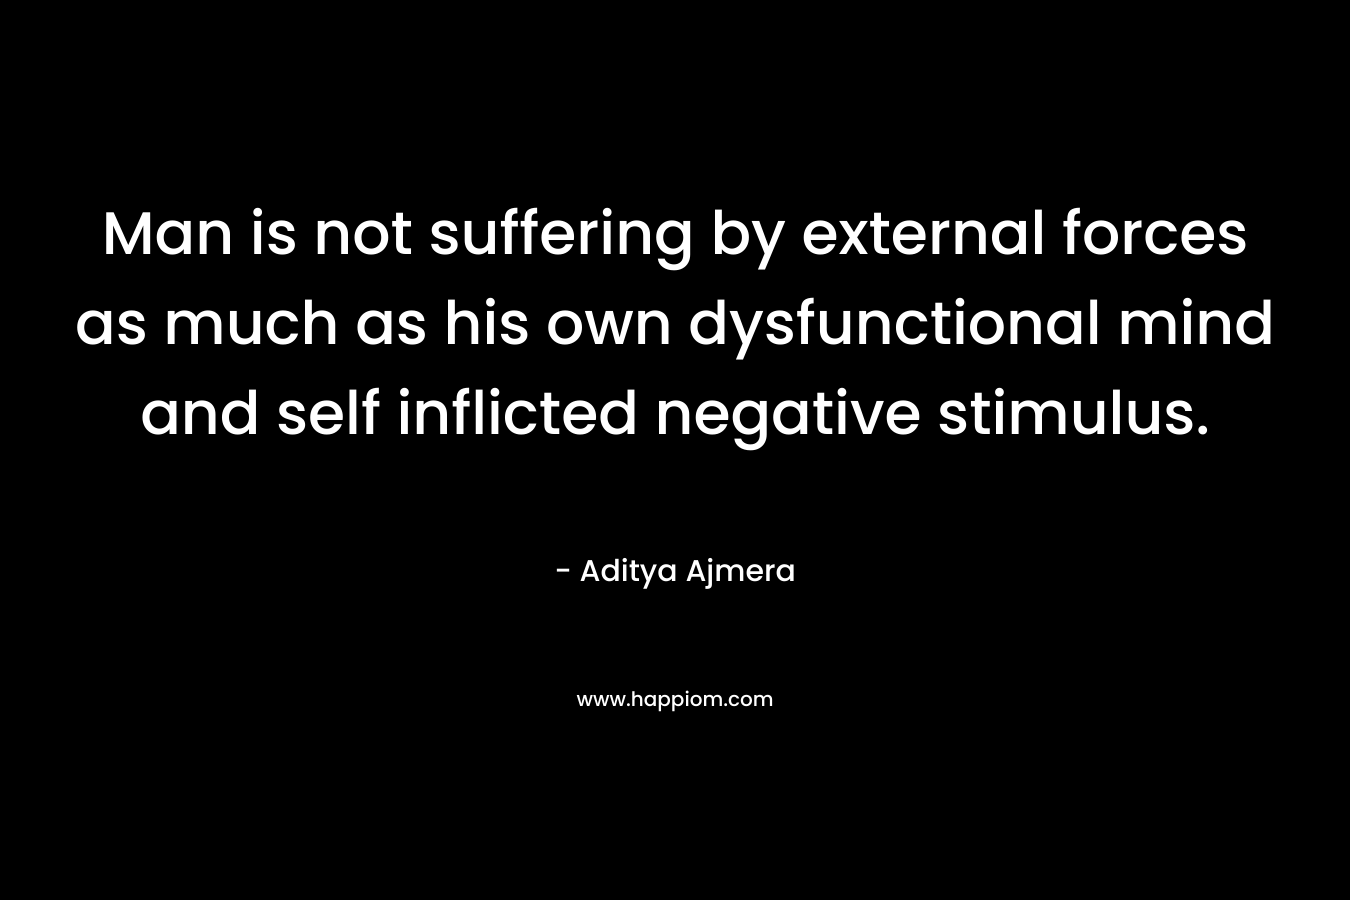 Man is not suffering by external forces as much as his own dysfunctional mind and self inflicted negative stimulus. – Aditya Ajmera